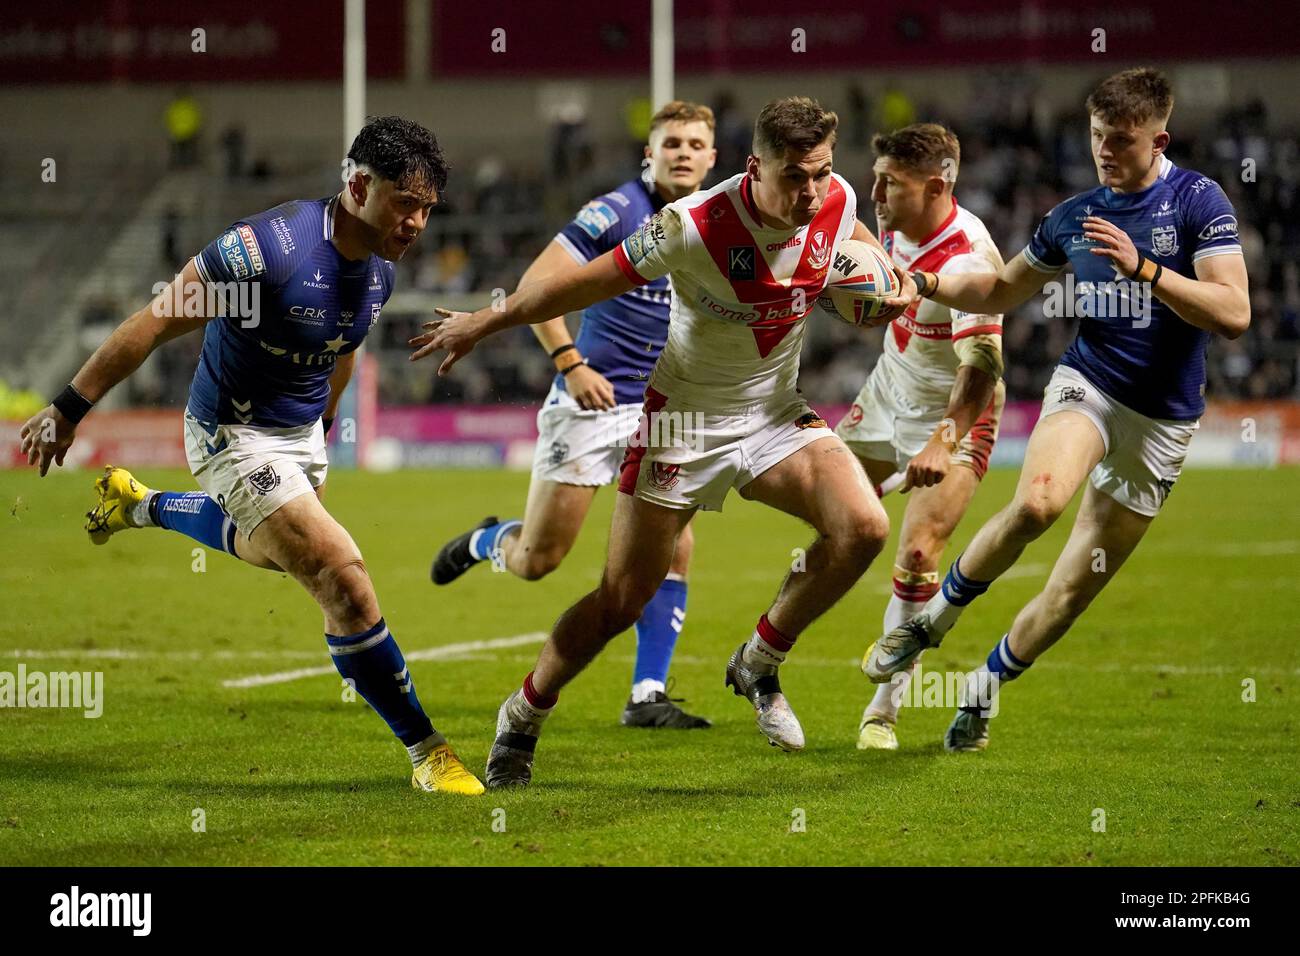 St Helens’ Jack Welsby evades being tackled on his way to scoring a try during the Betfred Super League match at the Totally Wicked Stadium, St Helens. Picture date: Friday March 17, 2023. Stock Photo